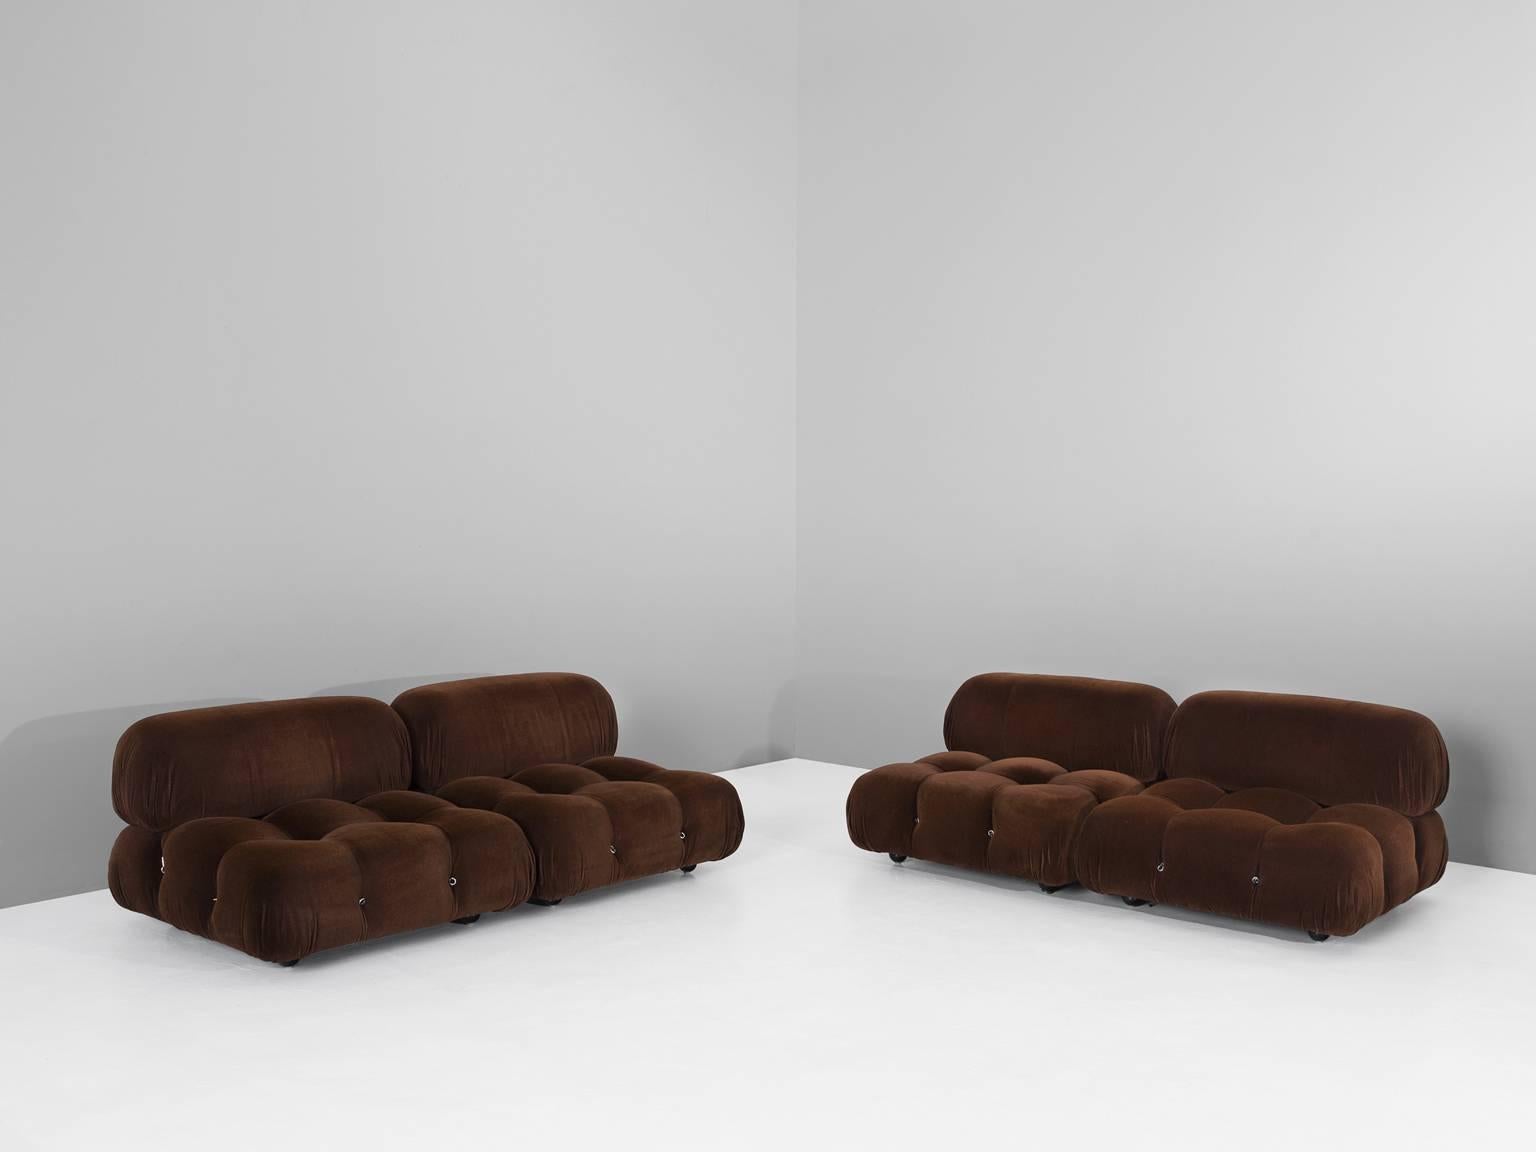 Modular 'Camaleonda' sofa, in fabric, by Mario Bellini for B&B Italia, Italy 1970s.

The sectional elements this sofa was made with, can be used freely and apart from one another. The backs are provided with rings and carabiners, which allows the